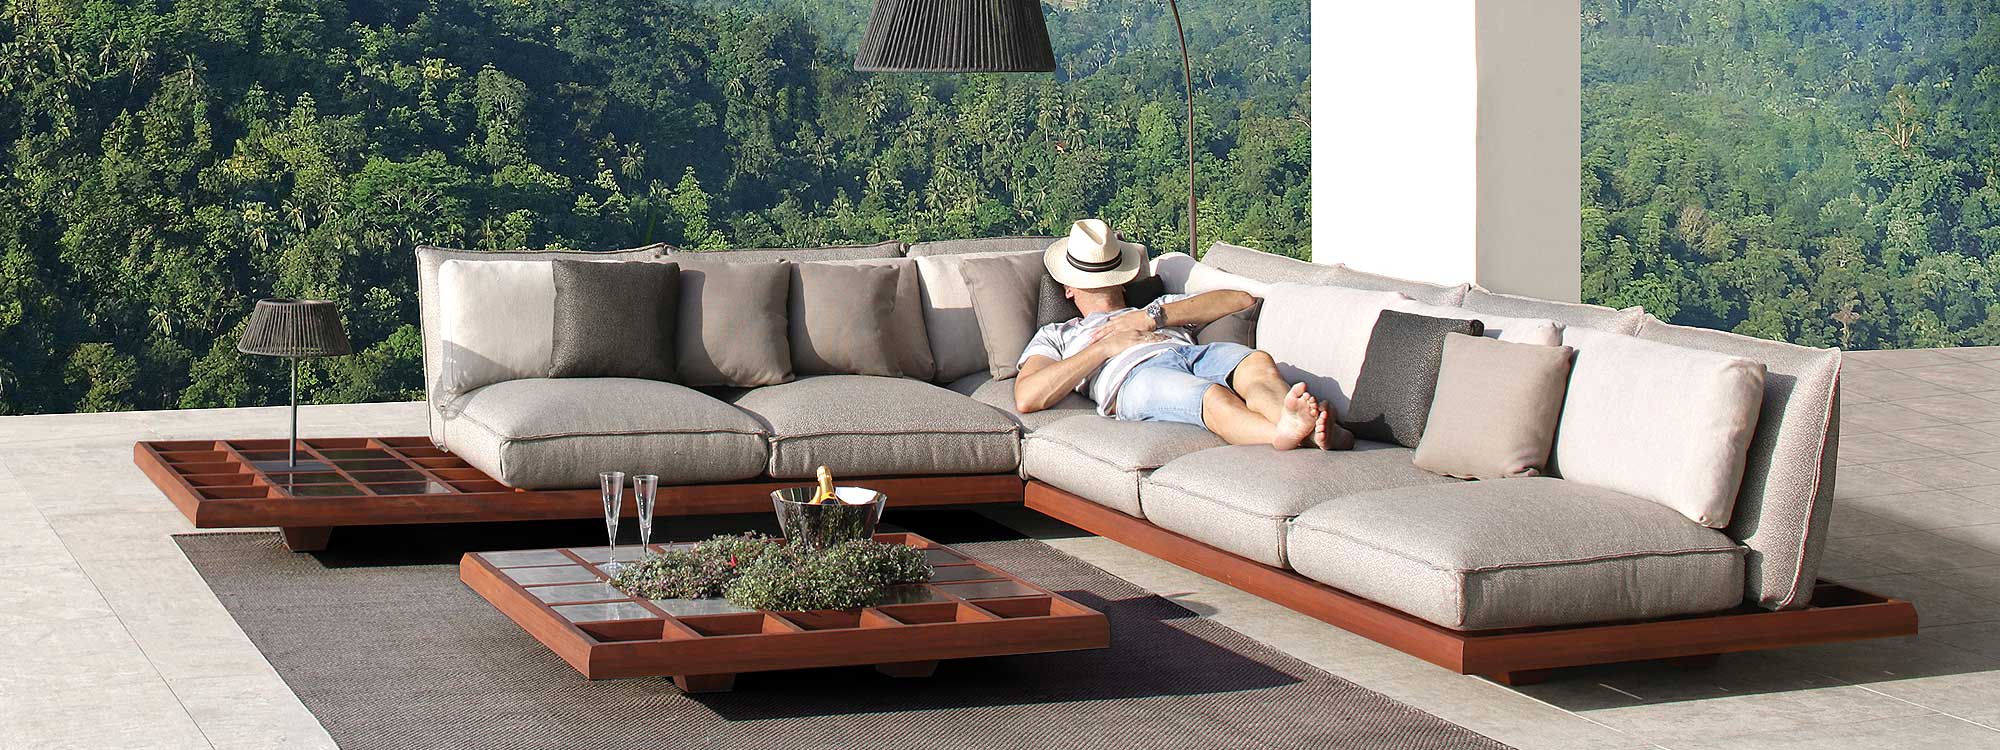 Image of man snoozing on Mozaix luxury outdoor sofa by Royal Botania, with lush woodland in background